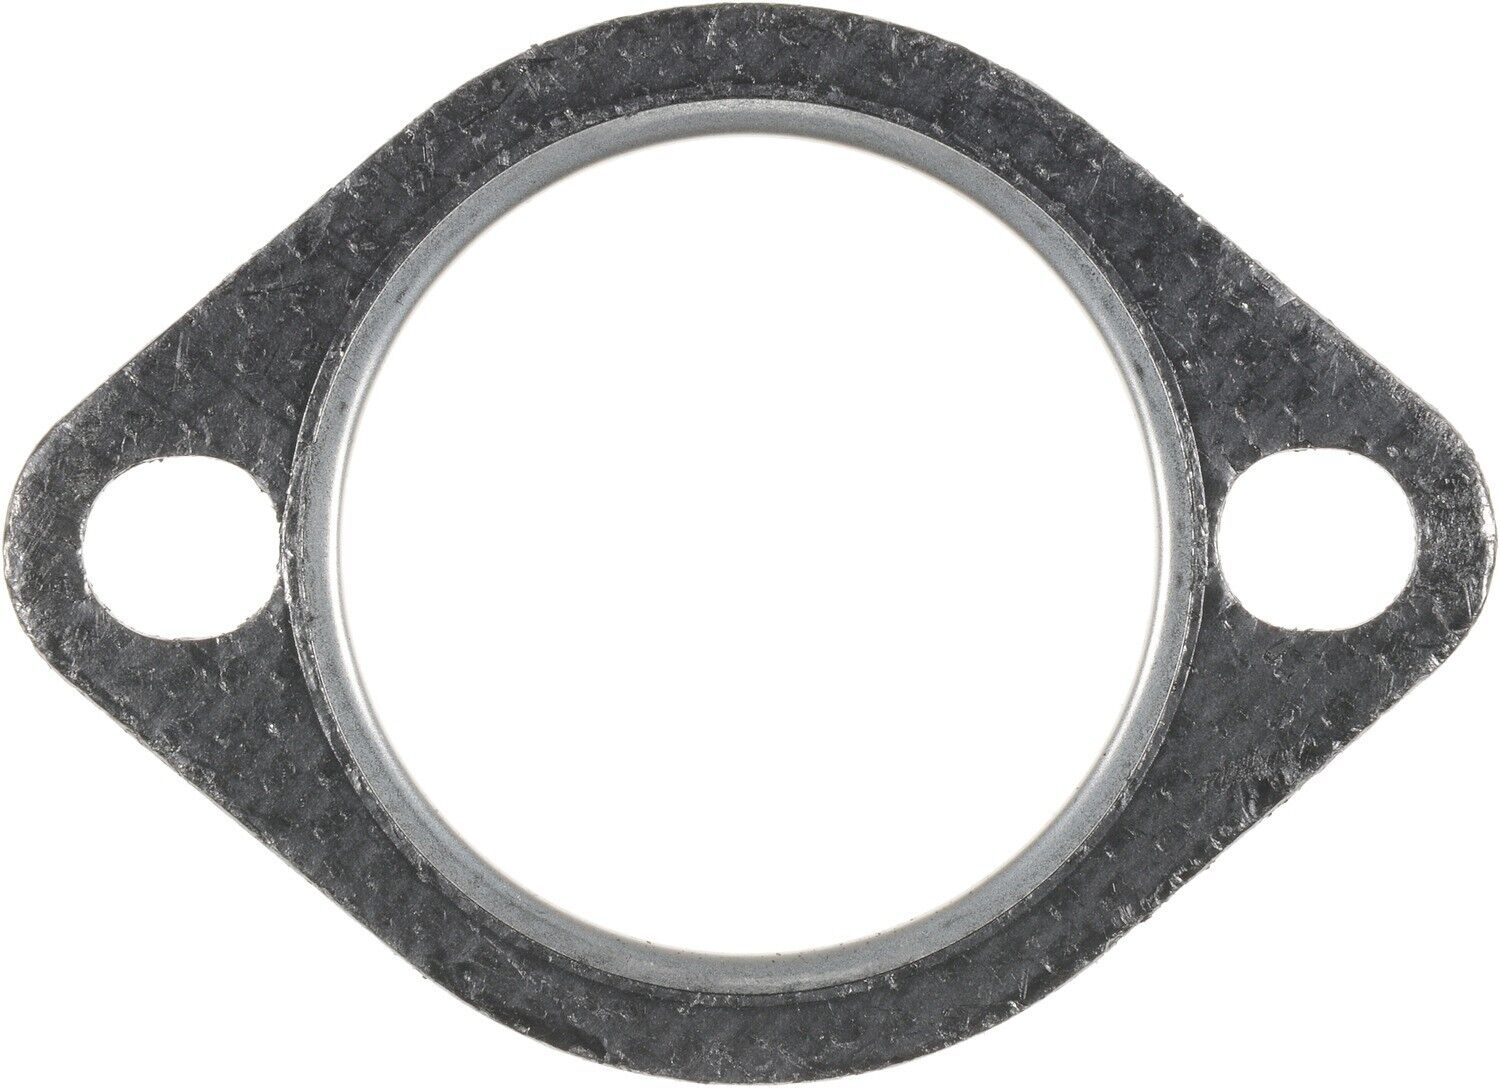 Exhaust Pipe Flange Gasket for 428, Shelby Cobra, Country Sedan+More 71-13638-00